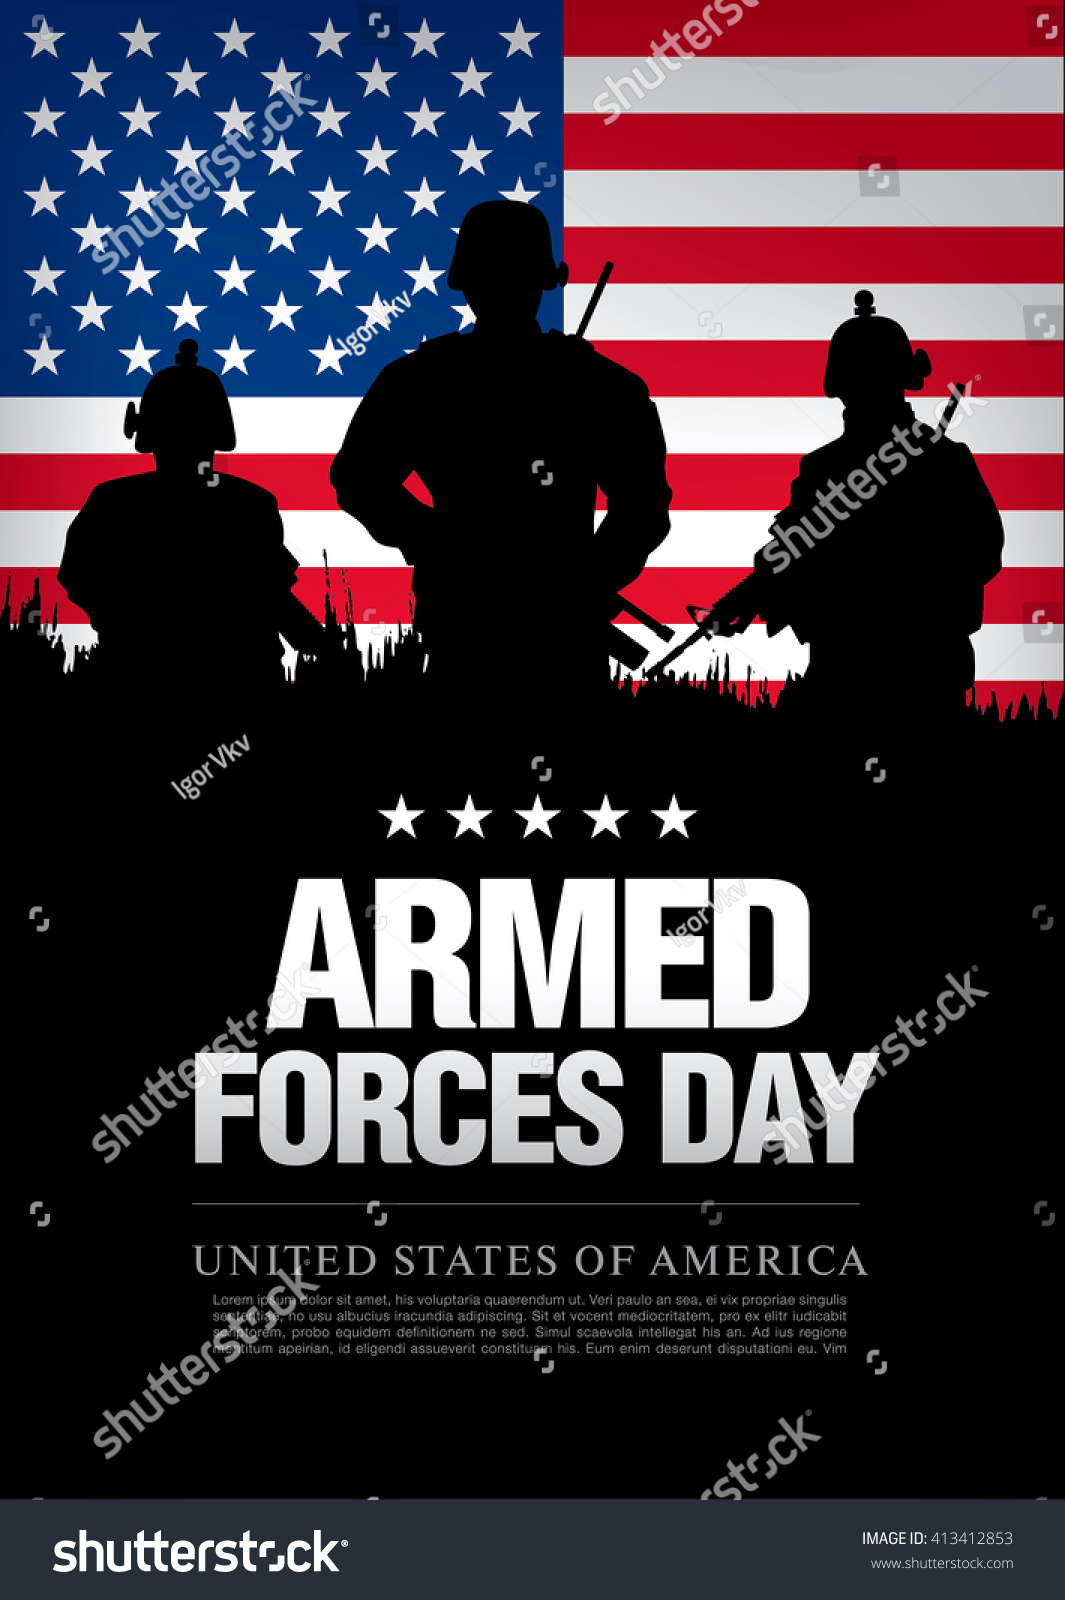 armed-forces-day-template-poster-design-stock-vector-illustration